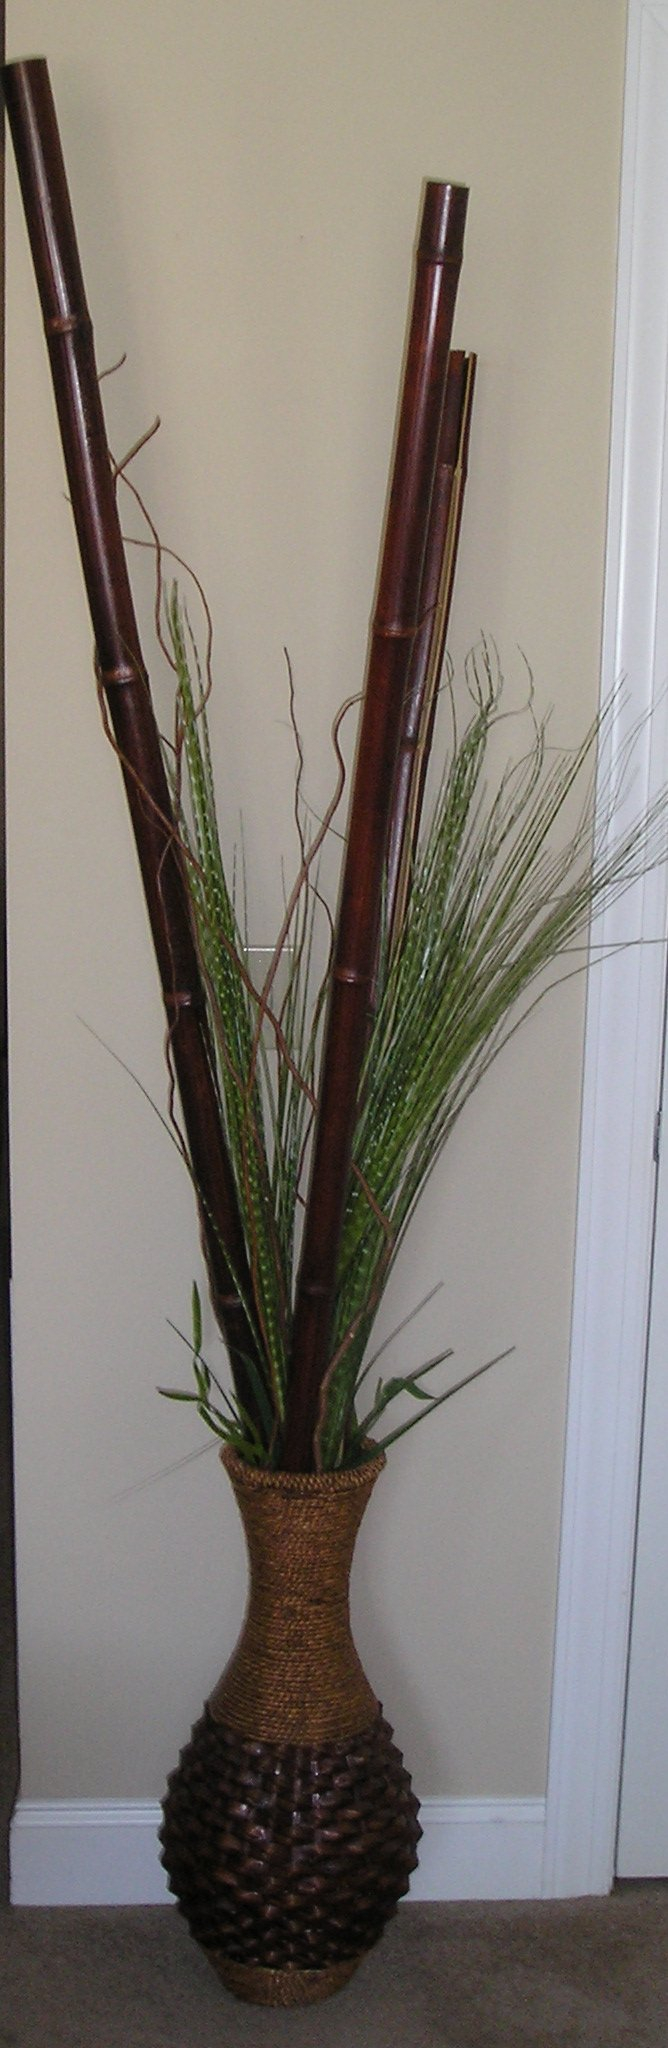 Sticks In A Vase With Greenery Just Not This Tall Put within size 668 X 2048